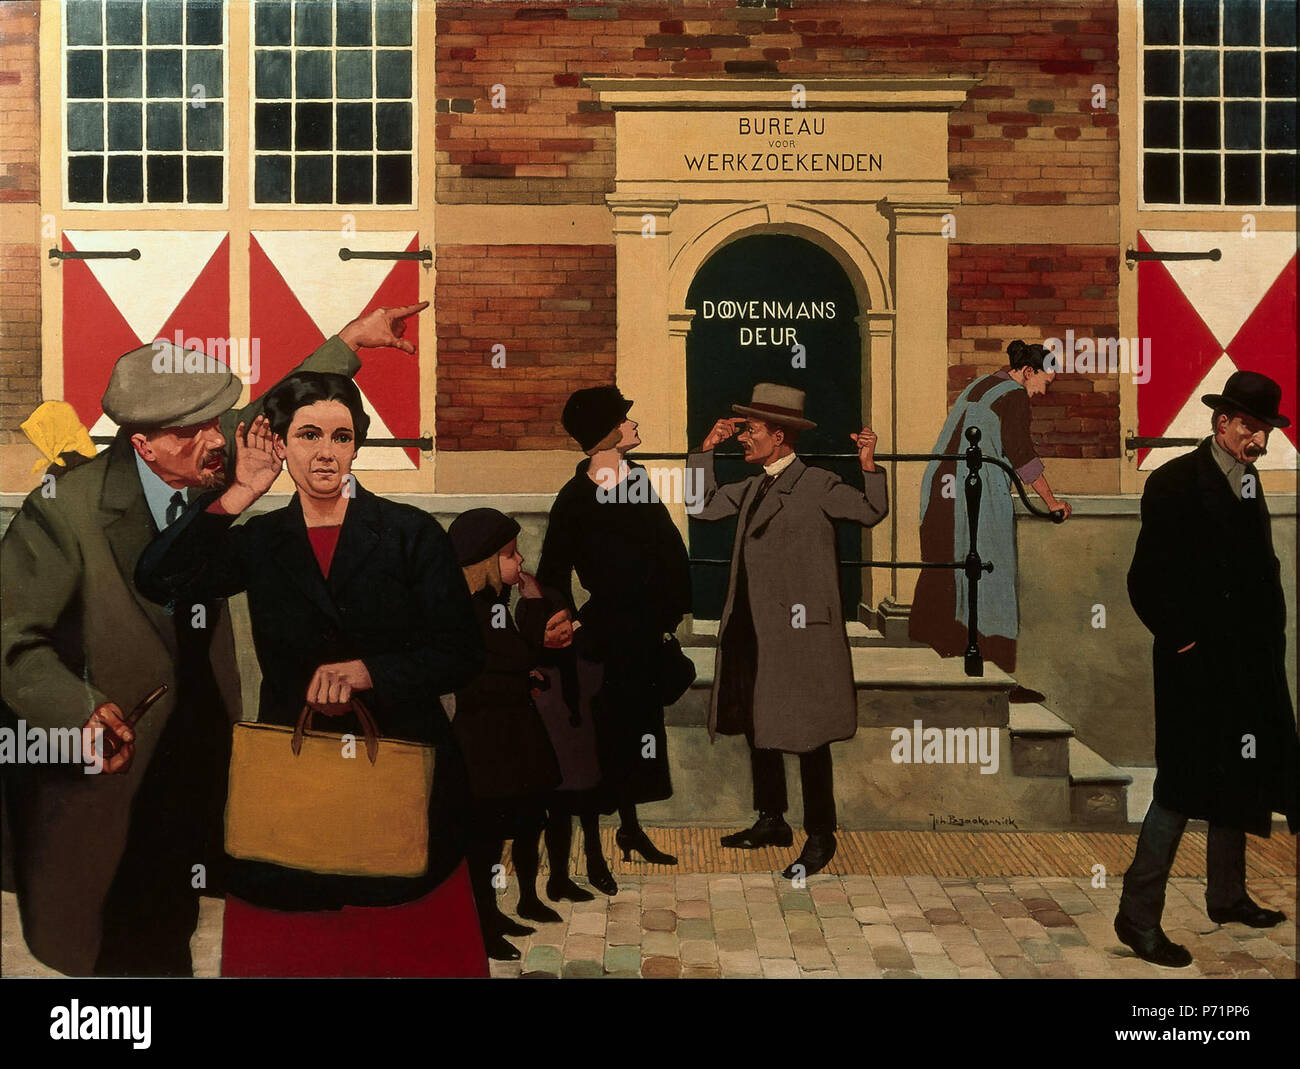 . Doovenmans deur . Unemployed people during the depressions years, waiting by the closed door of the job office. Passers-by seem to ignore their distress. 1939 6 Johan Braakensiek-Doovemansdeur Stock Photo